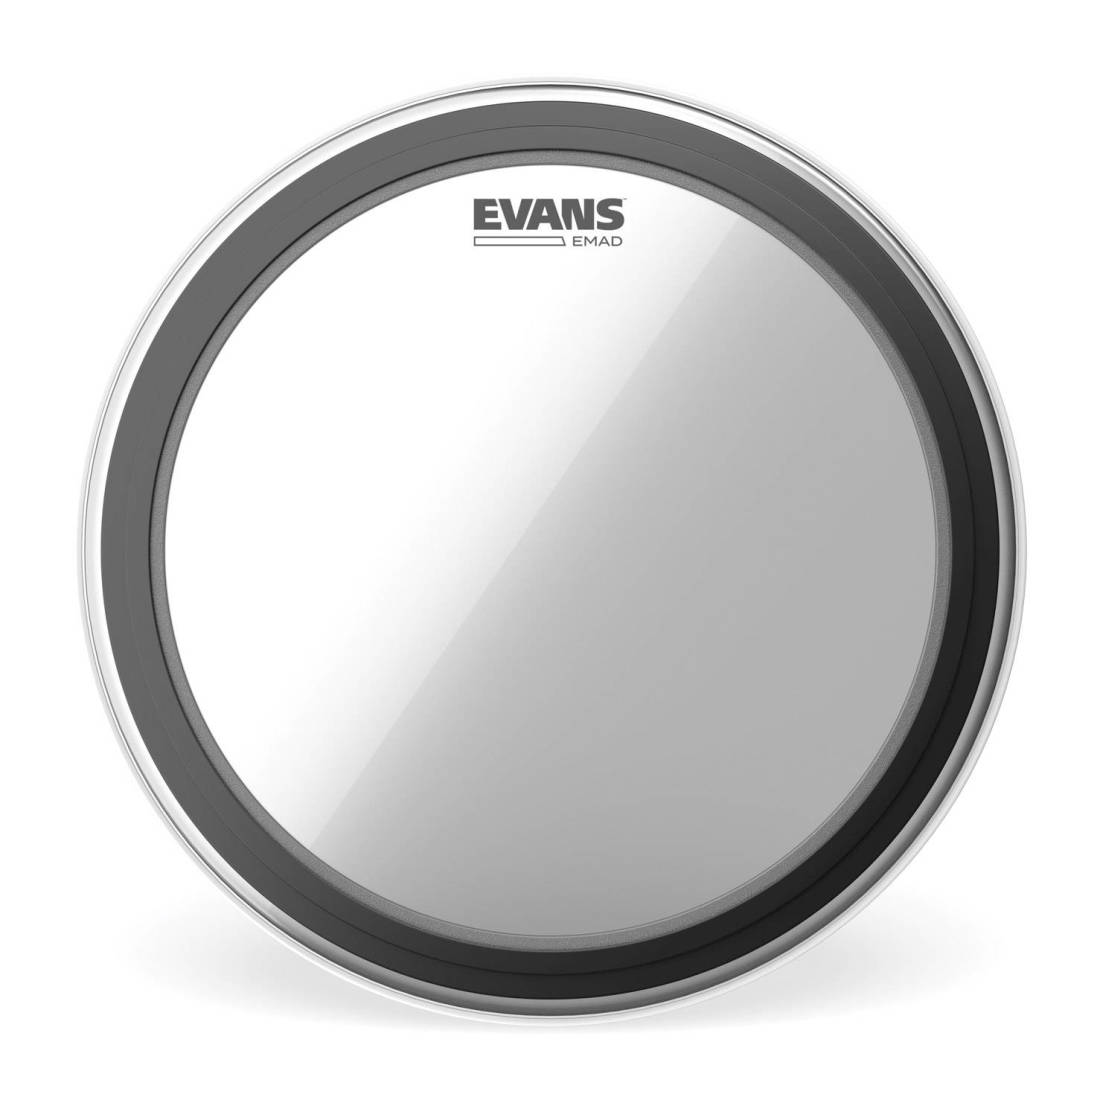 BD24EMAD - 24 Inch EMAD Batter Clear Drumhead